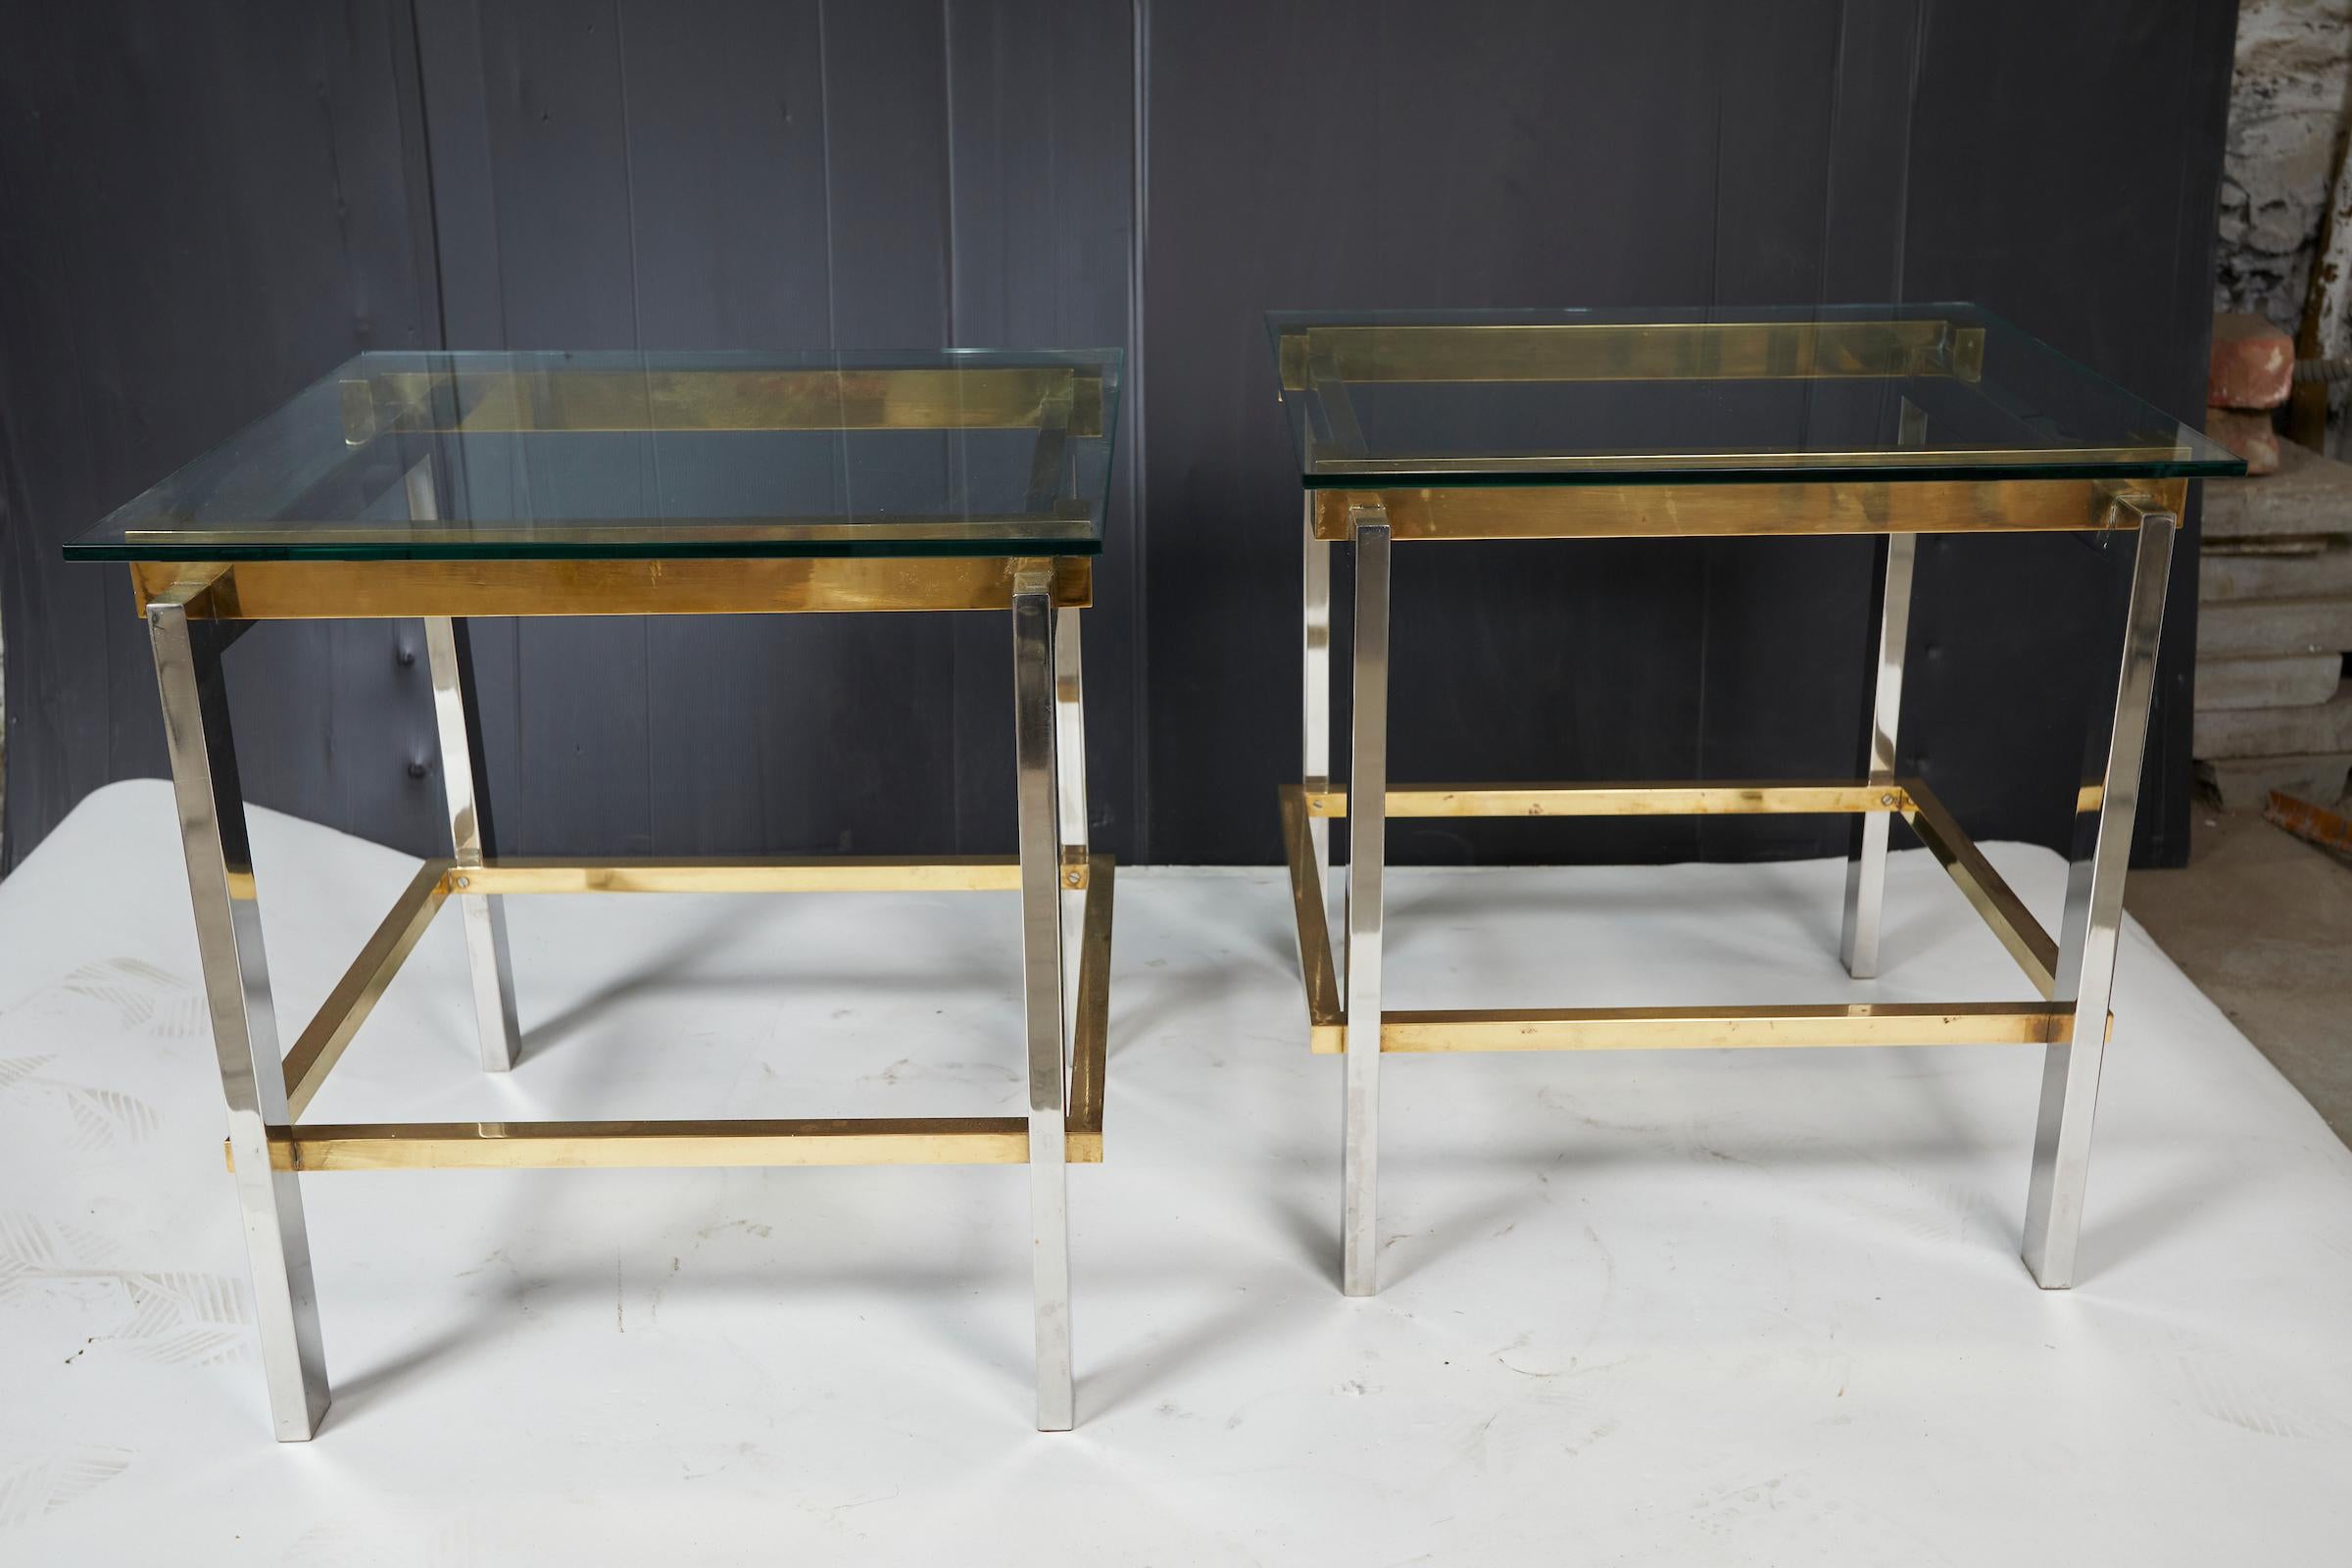 Pair of brass an chrome side tables by Romeo Rega with glass top.